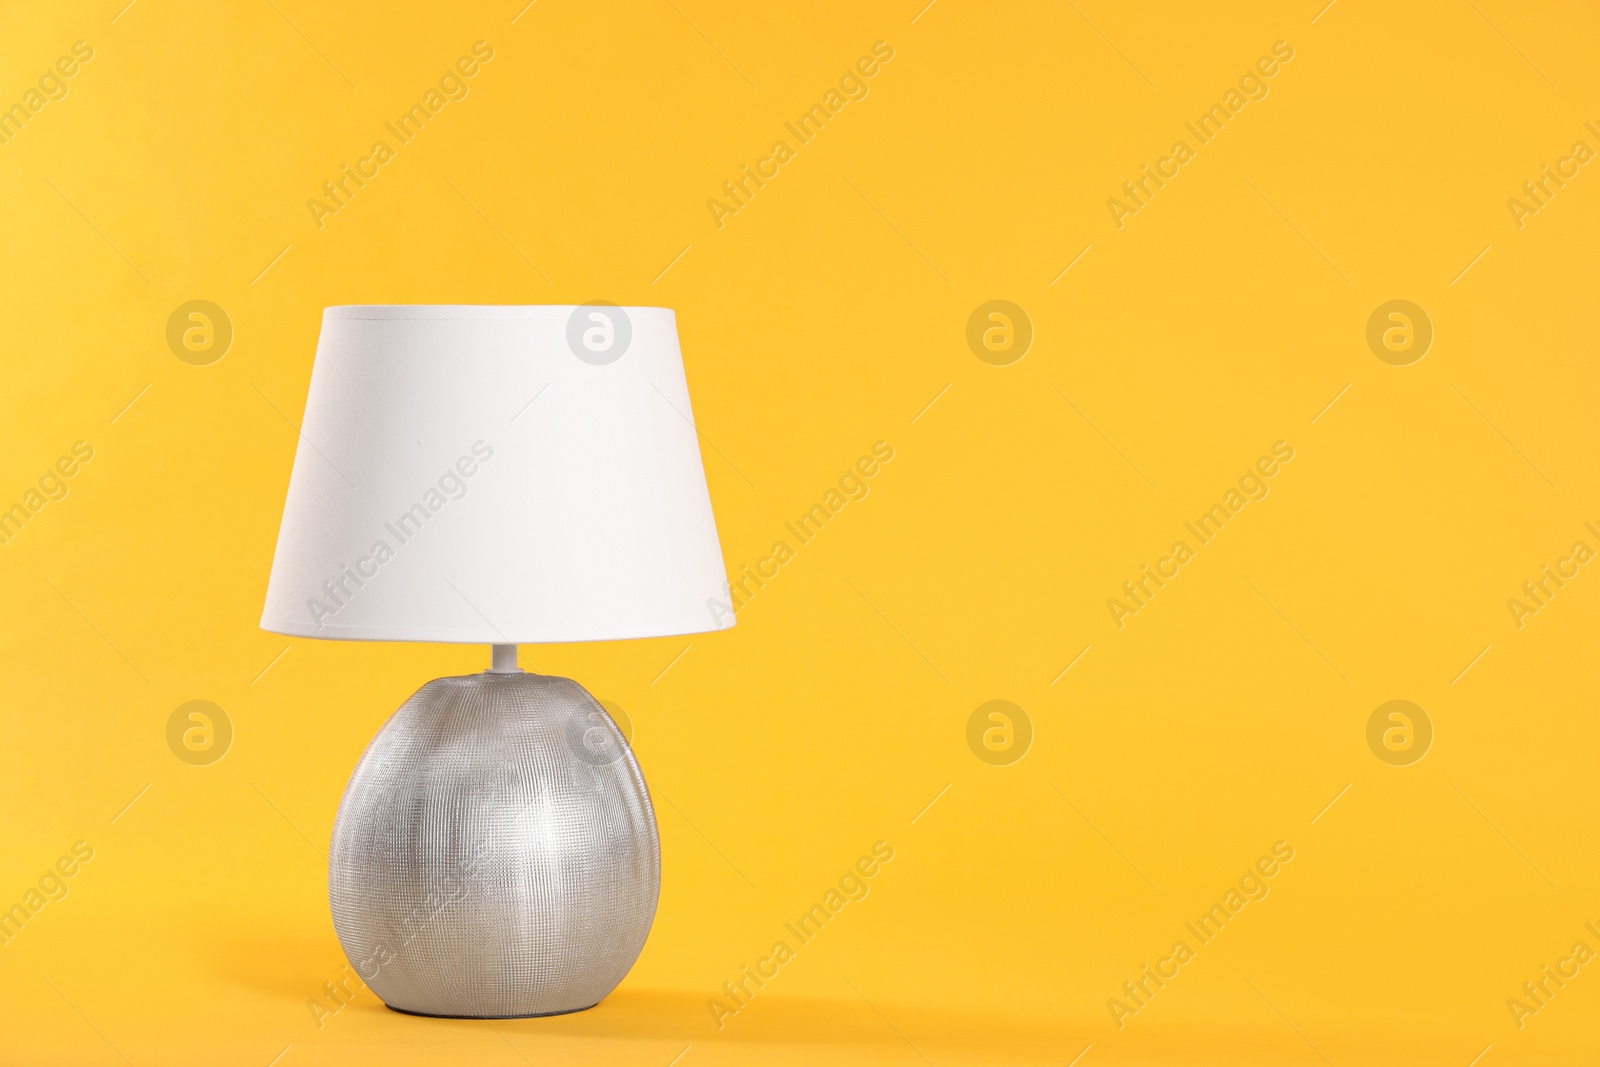 Photo of Stylish new night lamp on yellow background. Space for text